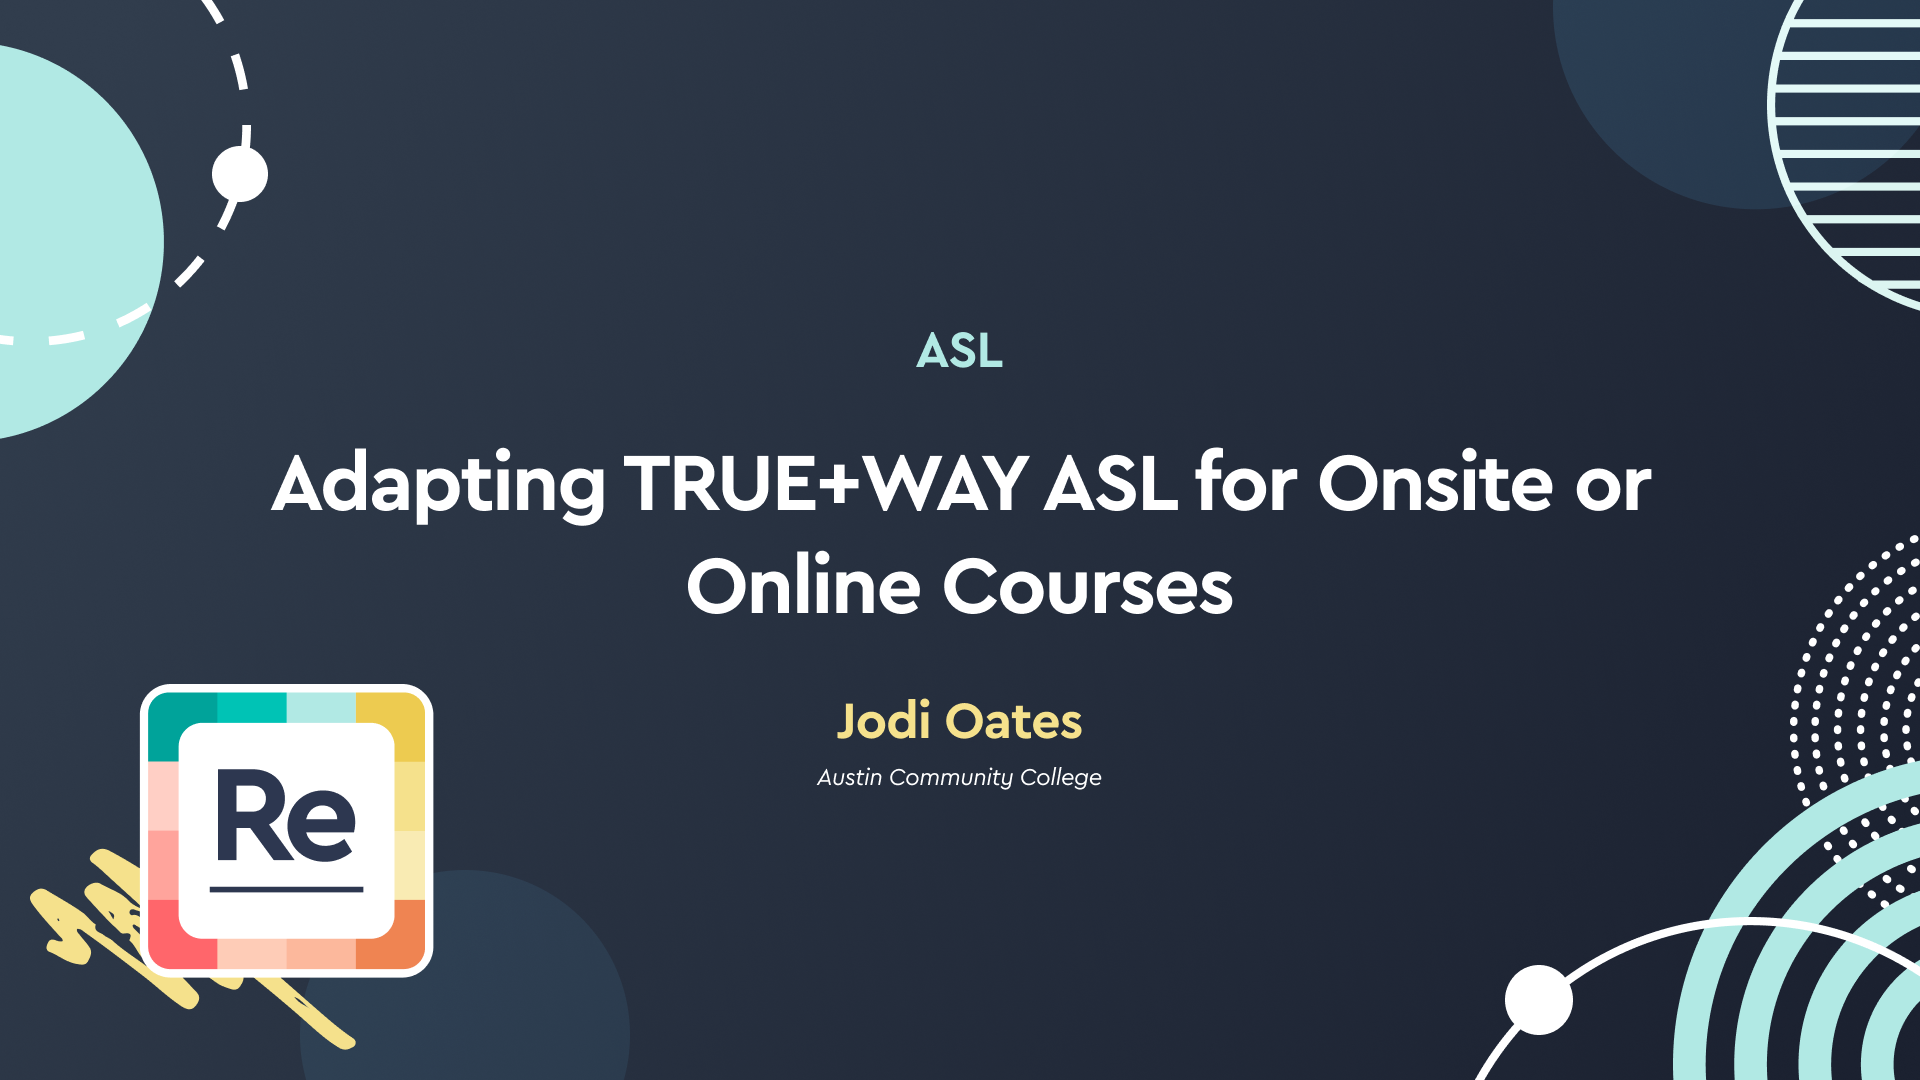 Adapting TRUE+WAY ASL for Onsite or Online Courses